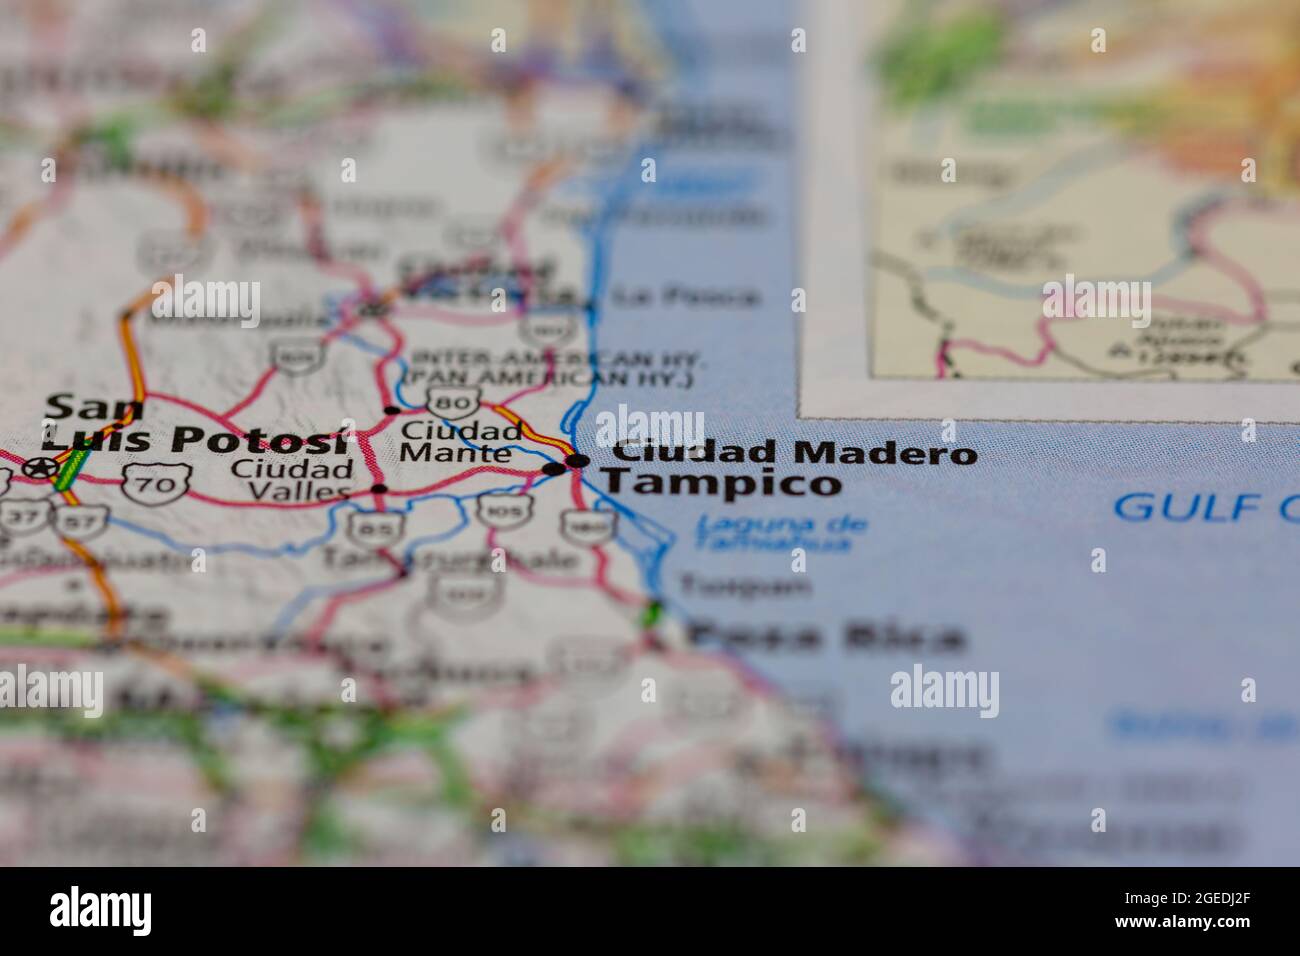 Ciudad Madero Mexico shown on a road map or Geography map Stock Photo